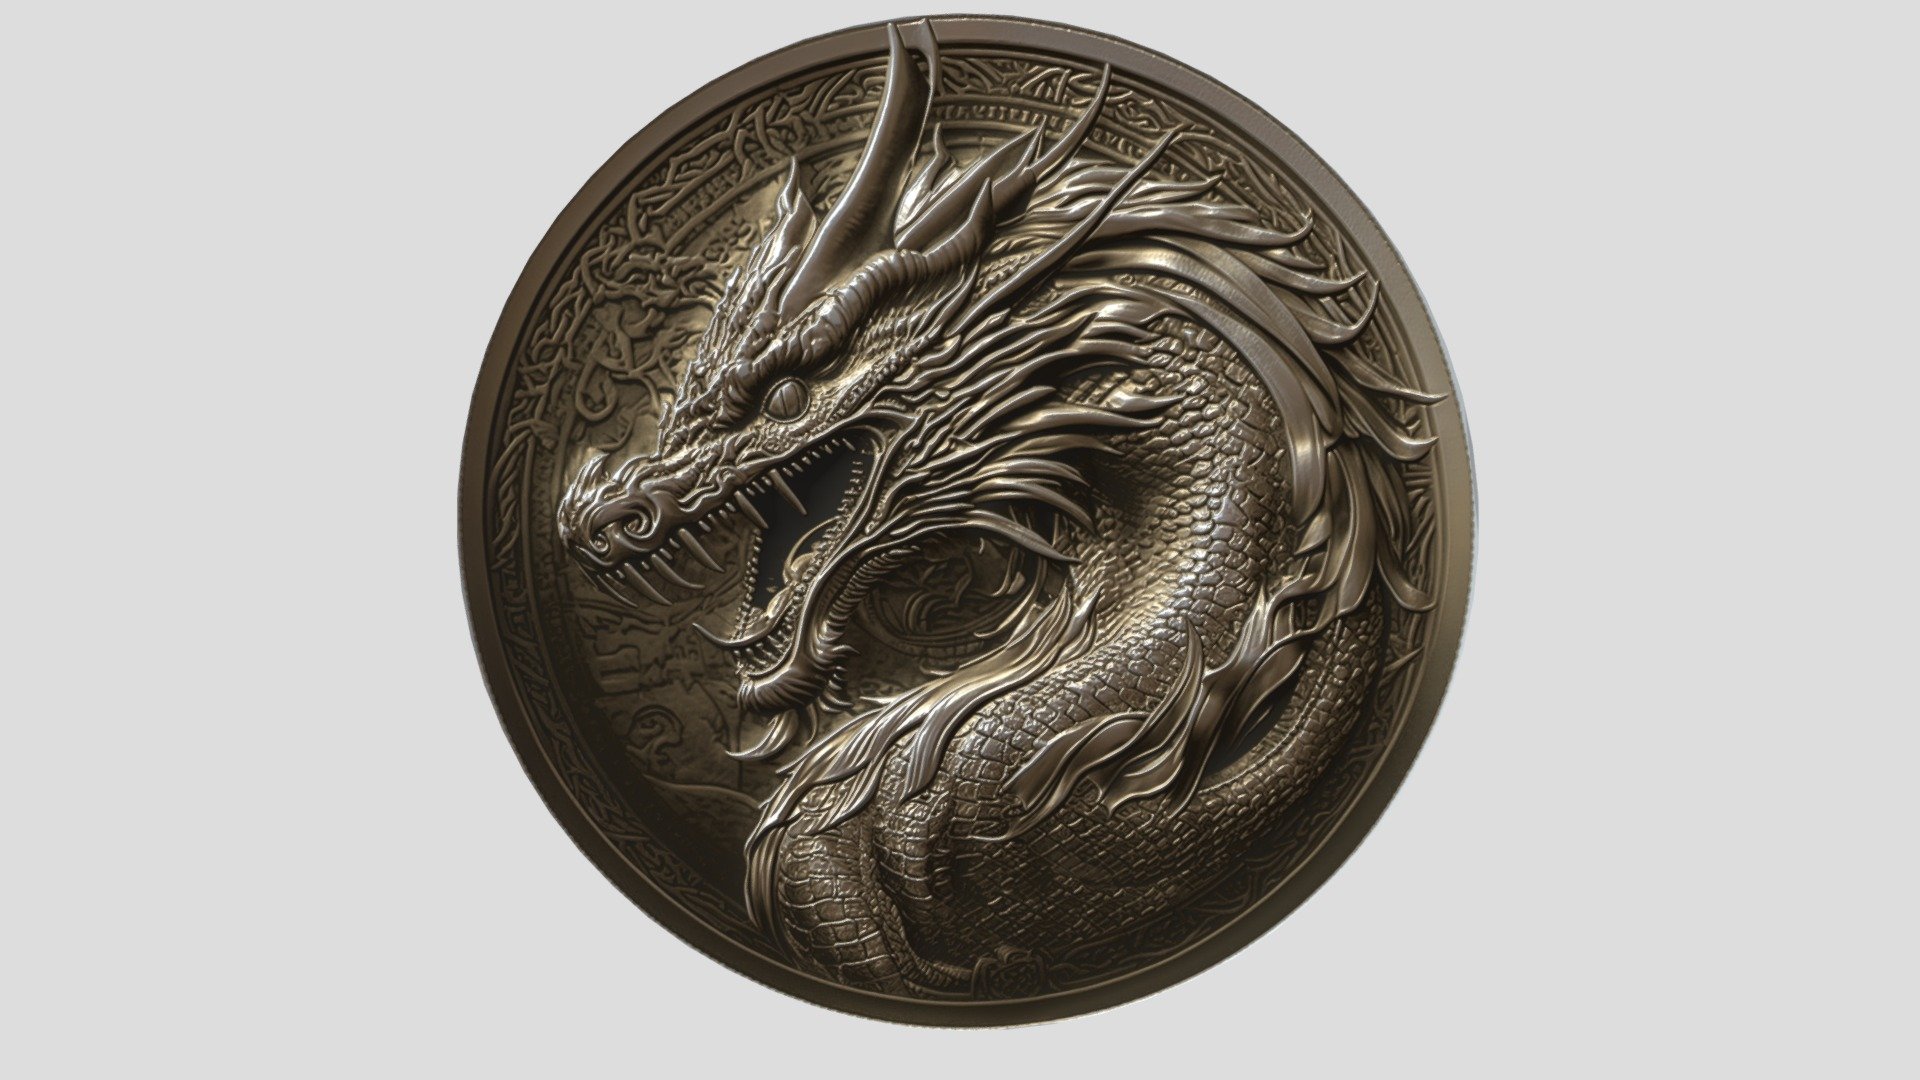 Fantasy dragon coin made with Mid Journey, Photoshop, Sampler and Blender.  This is the first of three coins. I hope you enjoy them. This one was made to appear to be freshly minted 3d model